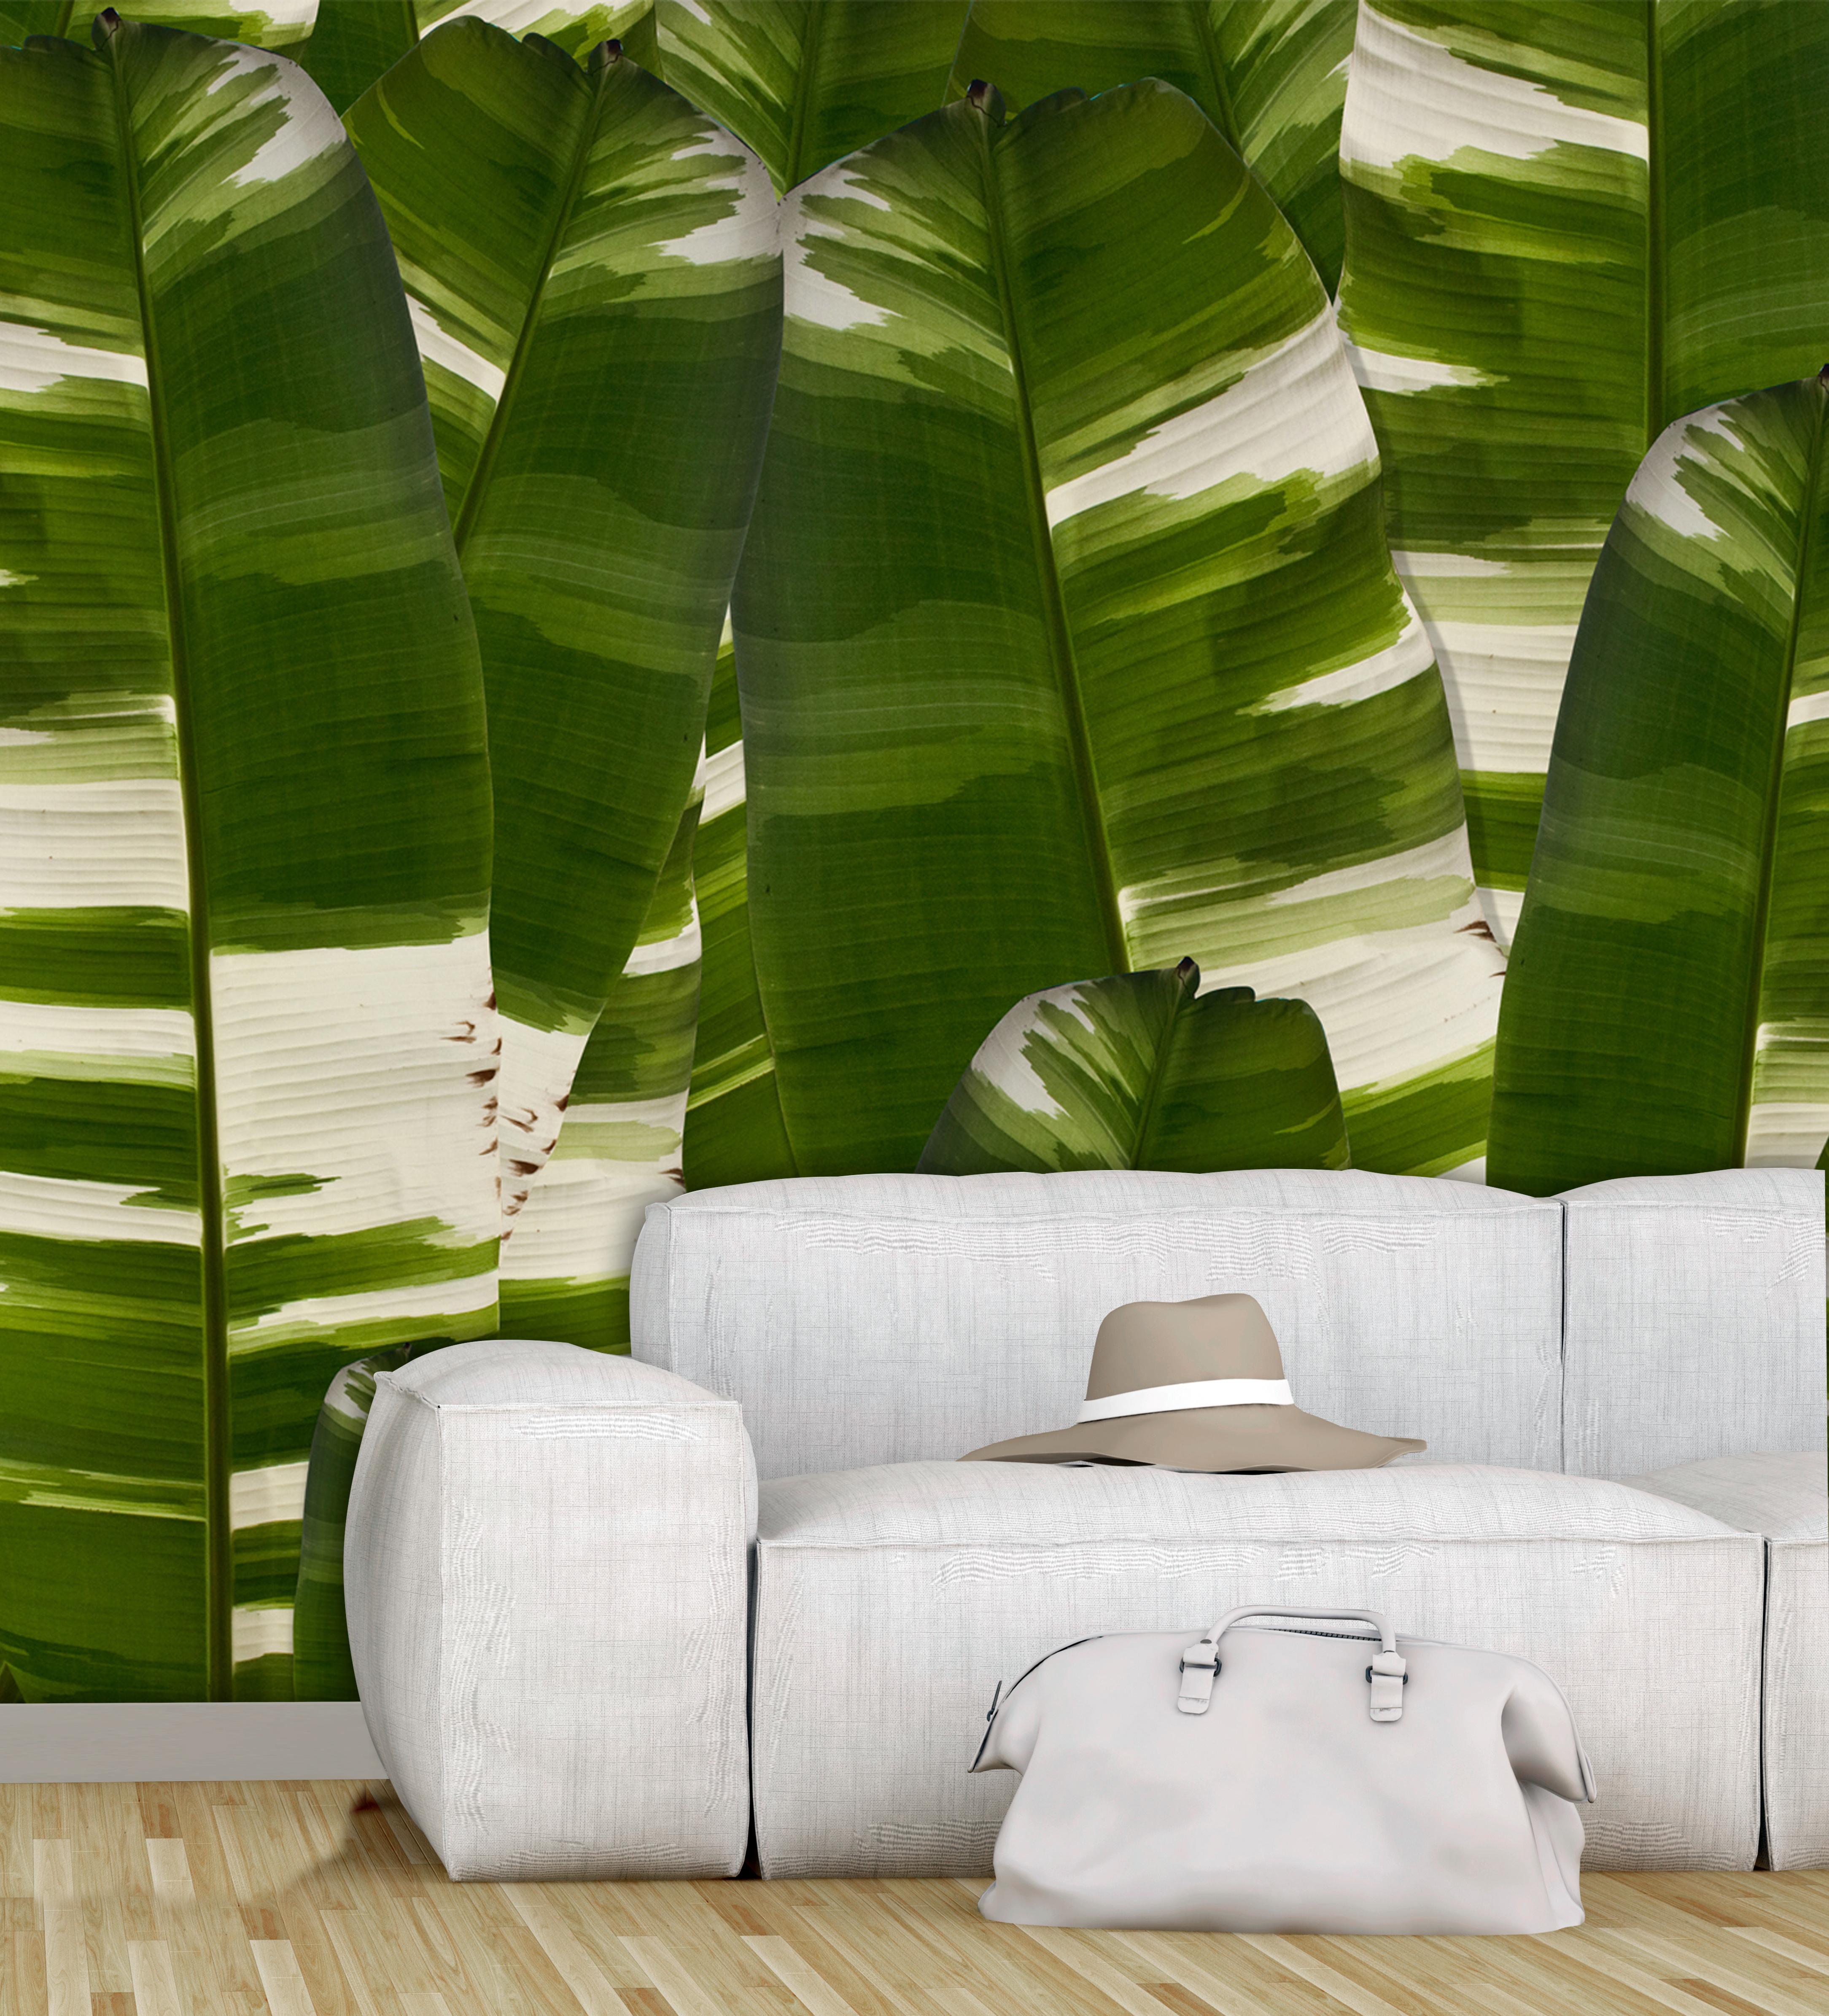 The Tropical Modernism collection makes inspirational references to the tropics, modernist design and the lush gardens surrounding our home base of Miami, FL. We have reinterpreted the 